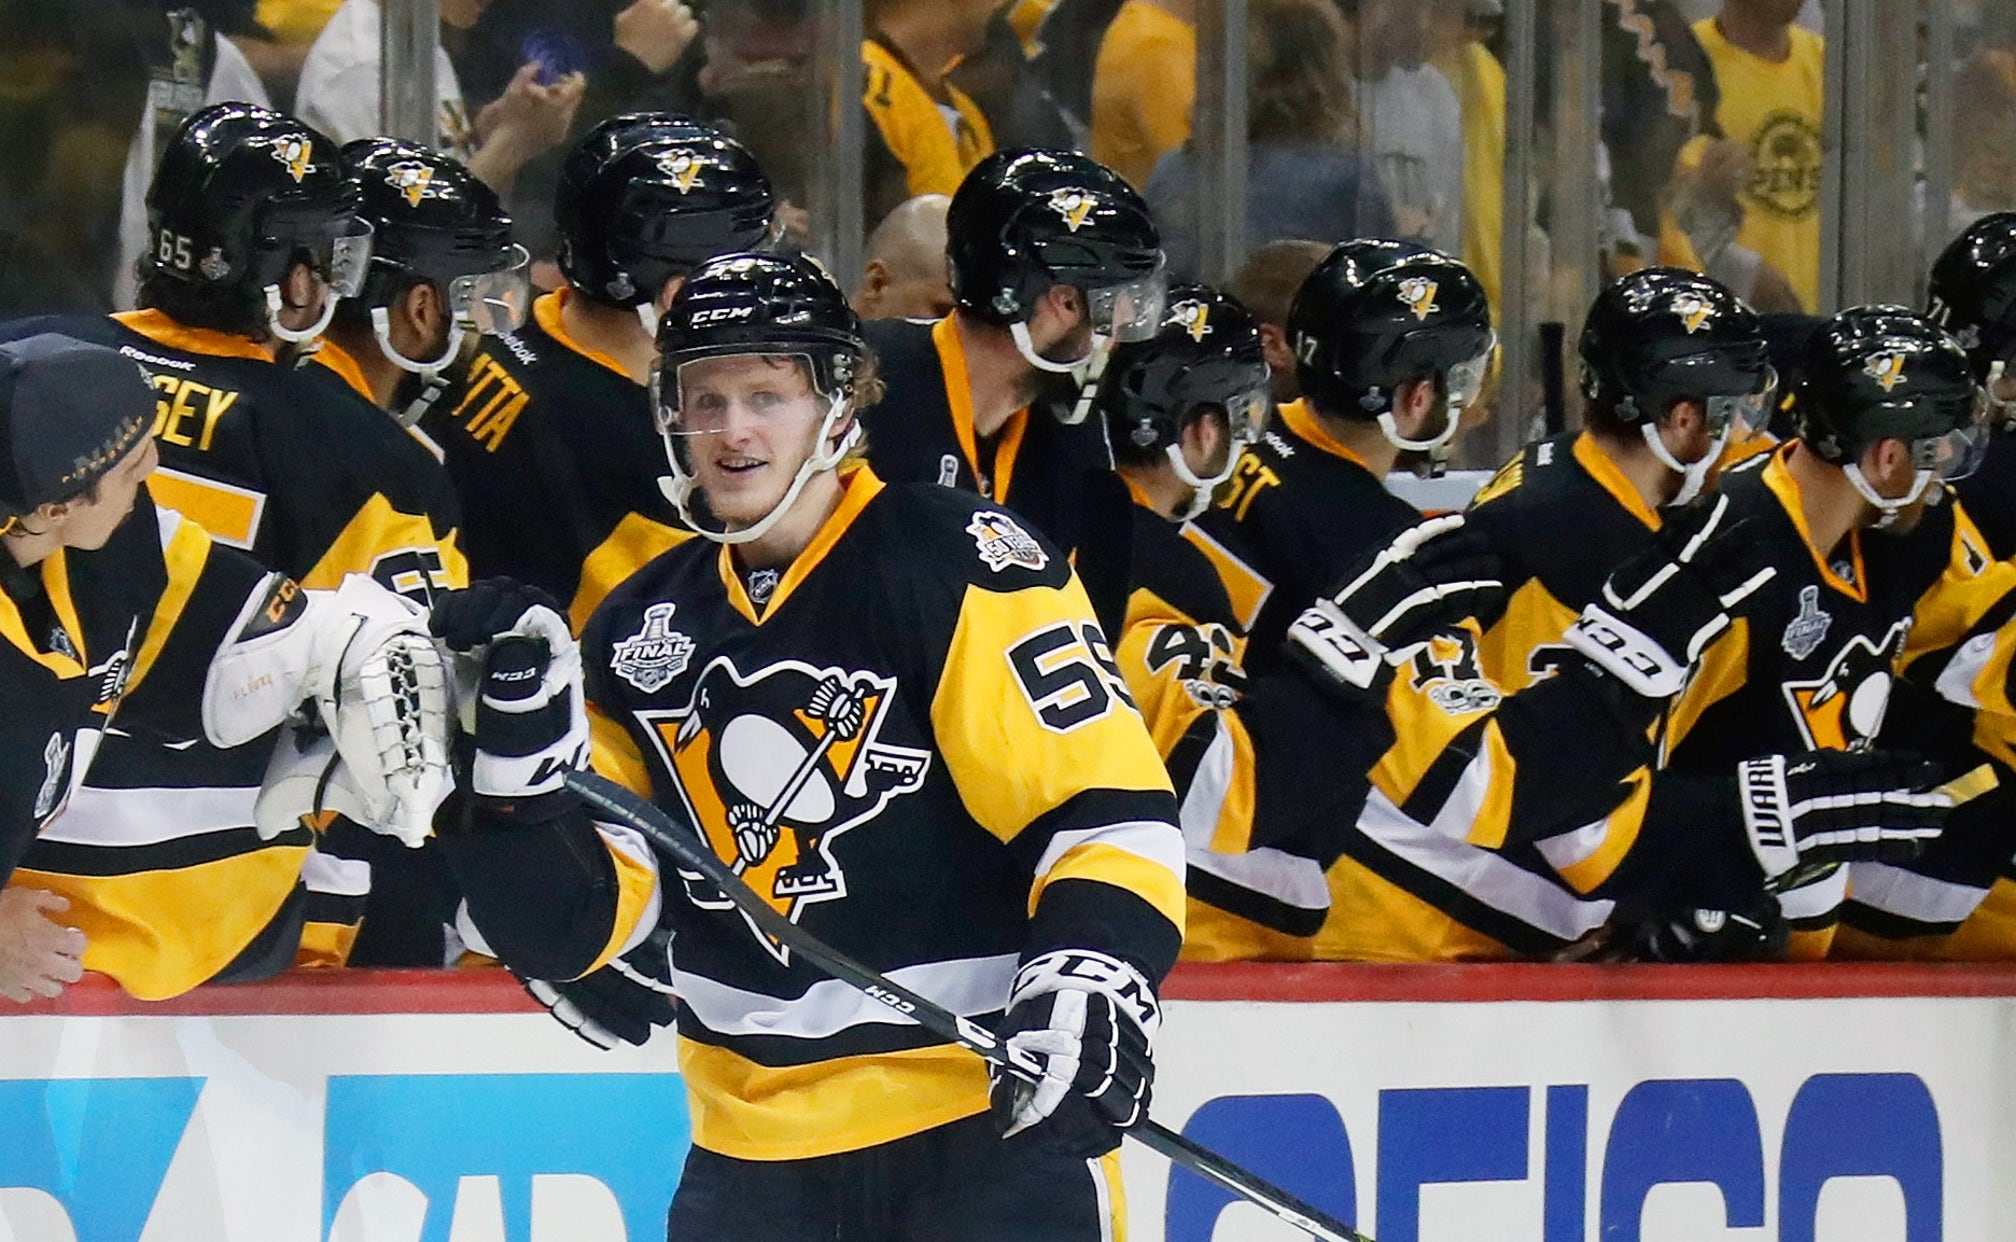 Jake Guentzel goes from rookie to Stanley Cup catalyst, with an assist